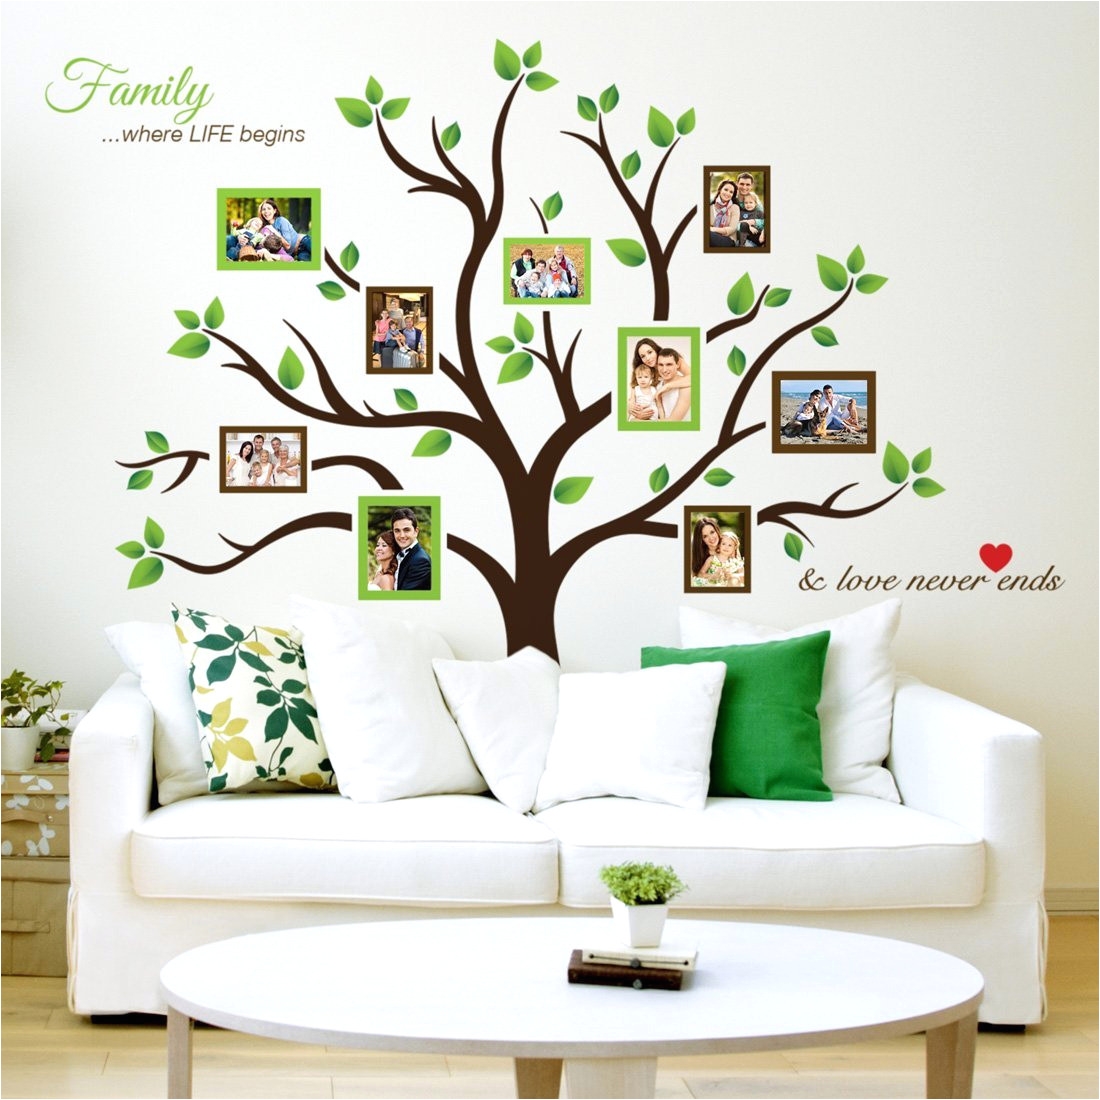 Puzzle Piece Wall Decor 46 Awesome Puzzle Piece Wall Art Gallery 119044